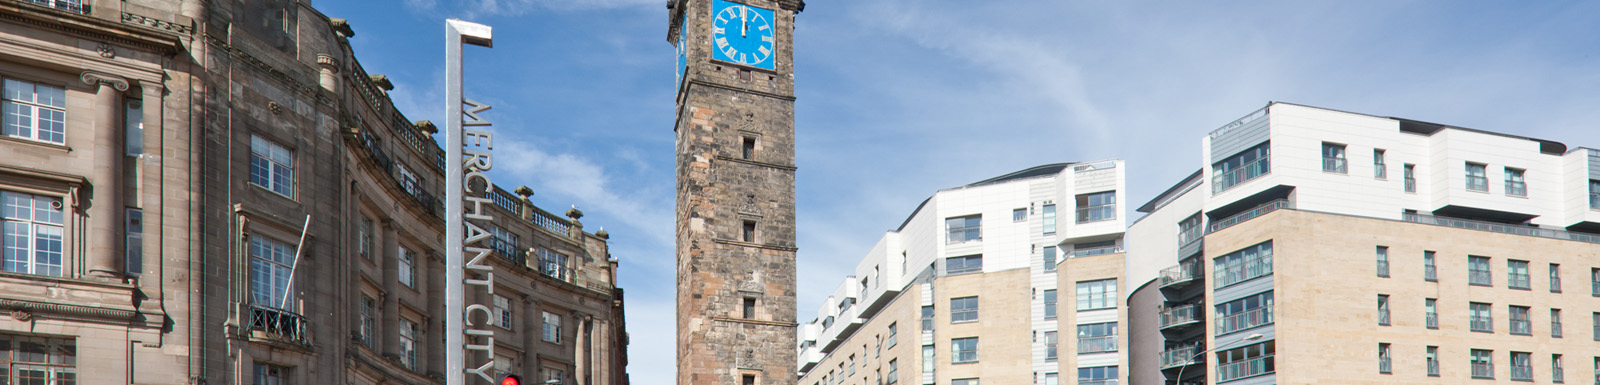 The Tolbooth clock and tower, Merchant City